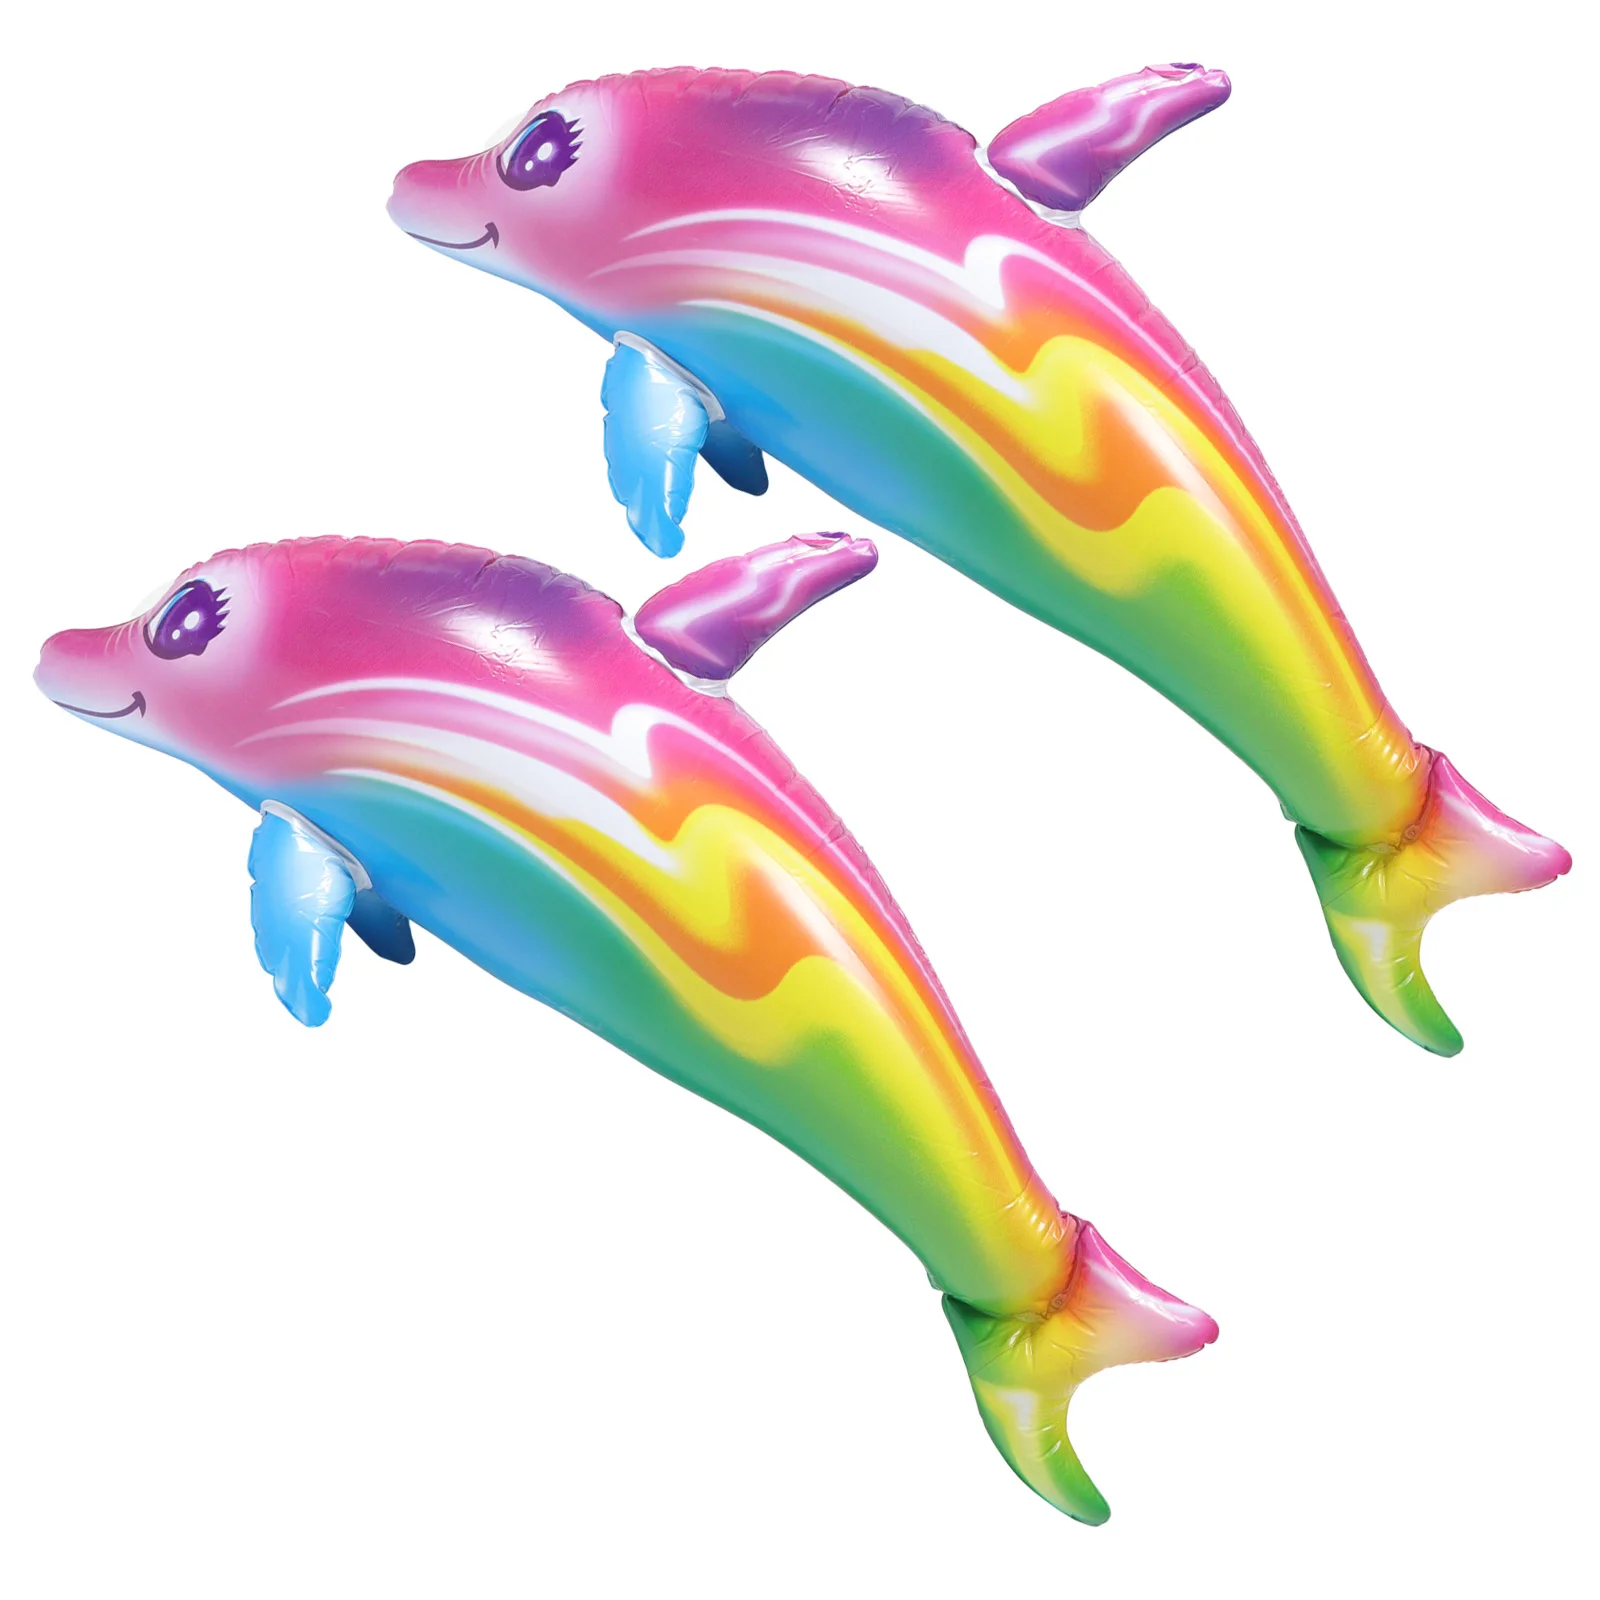 2 Pcs Inflatable Dolphin Toy Beach Game Party Favors Toys Swimming Pool Learning - $16.91